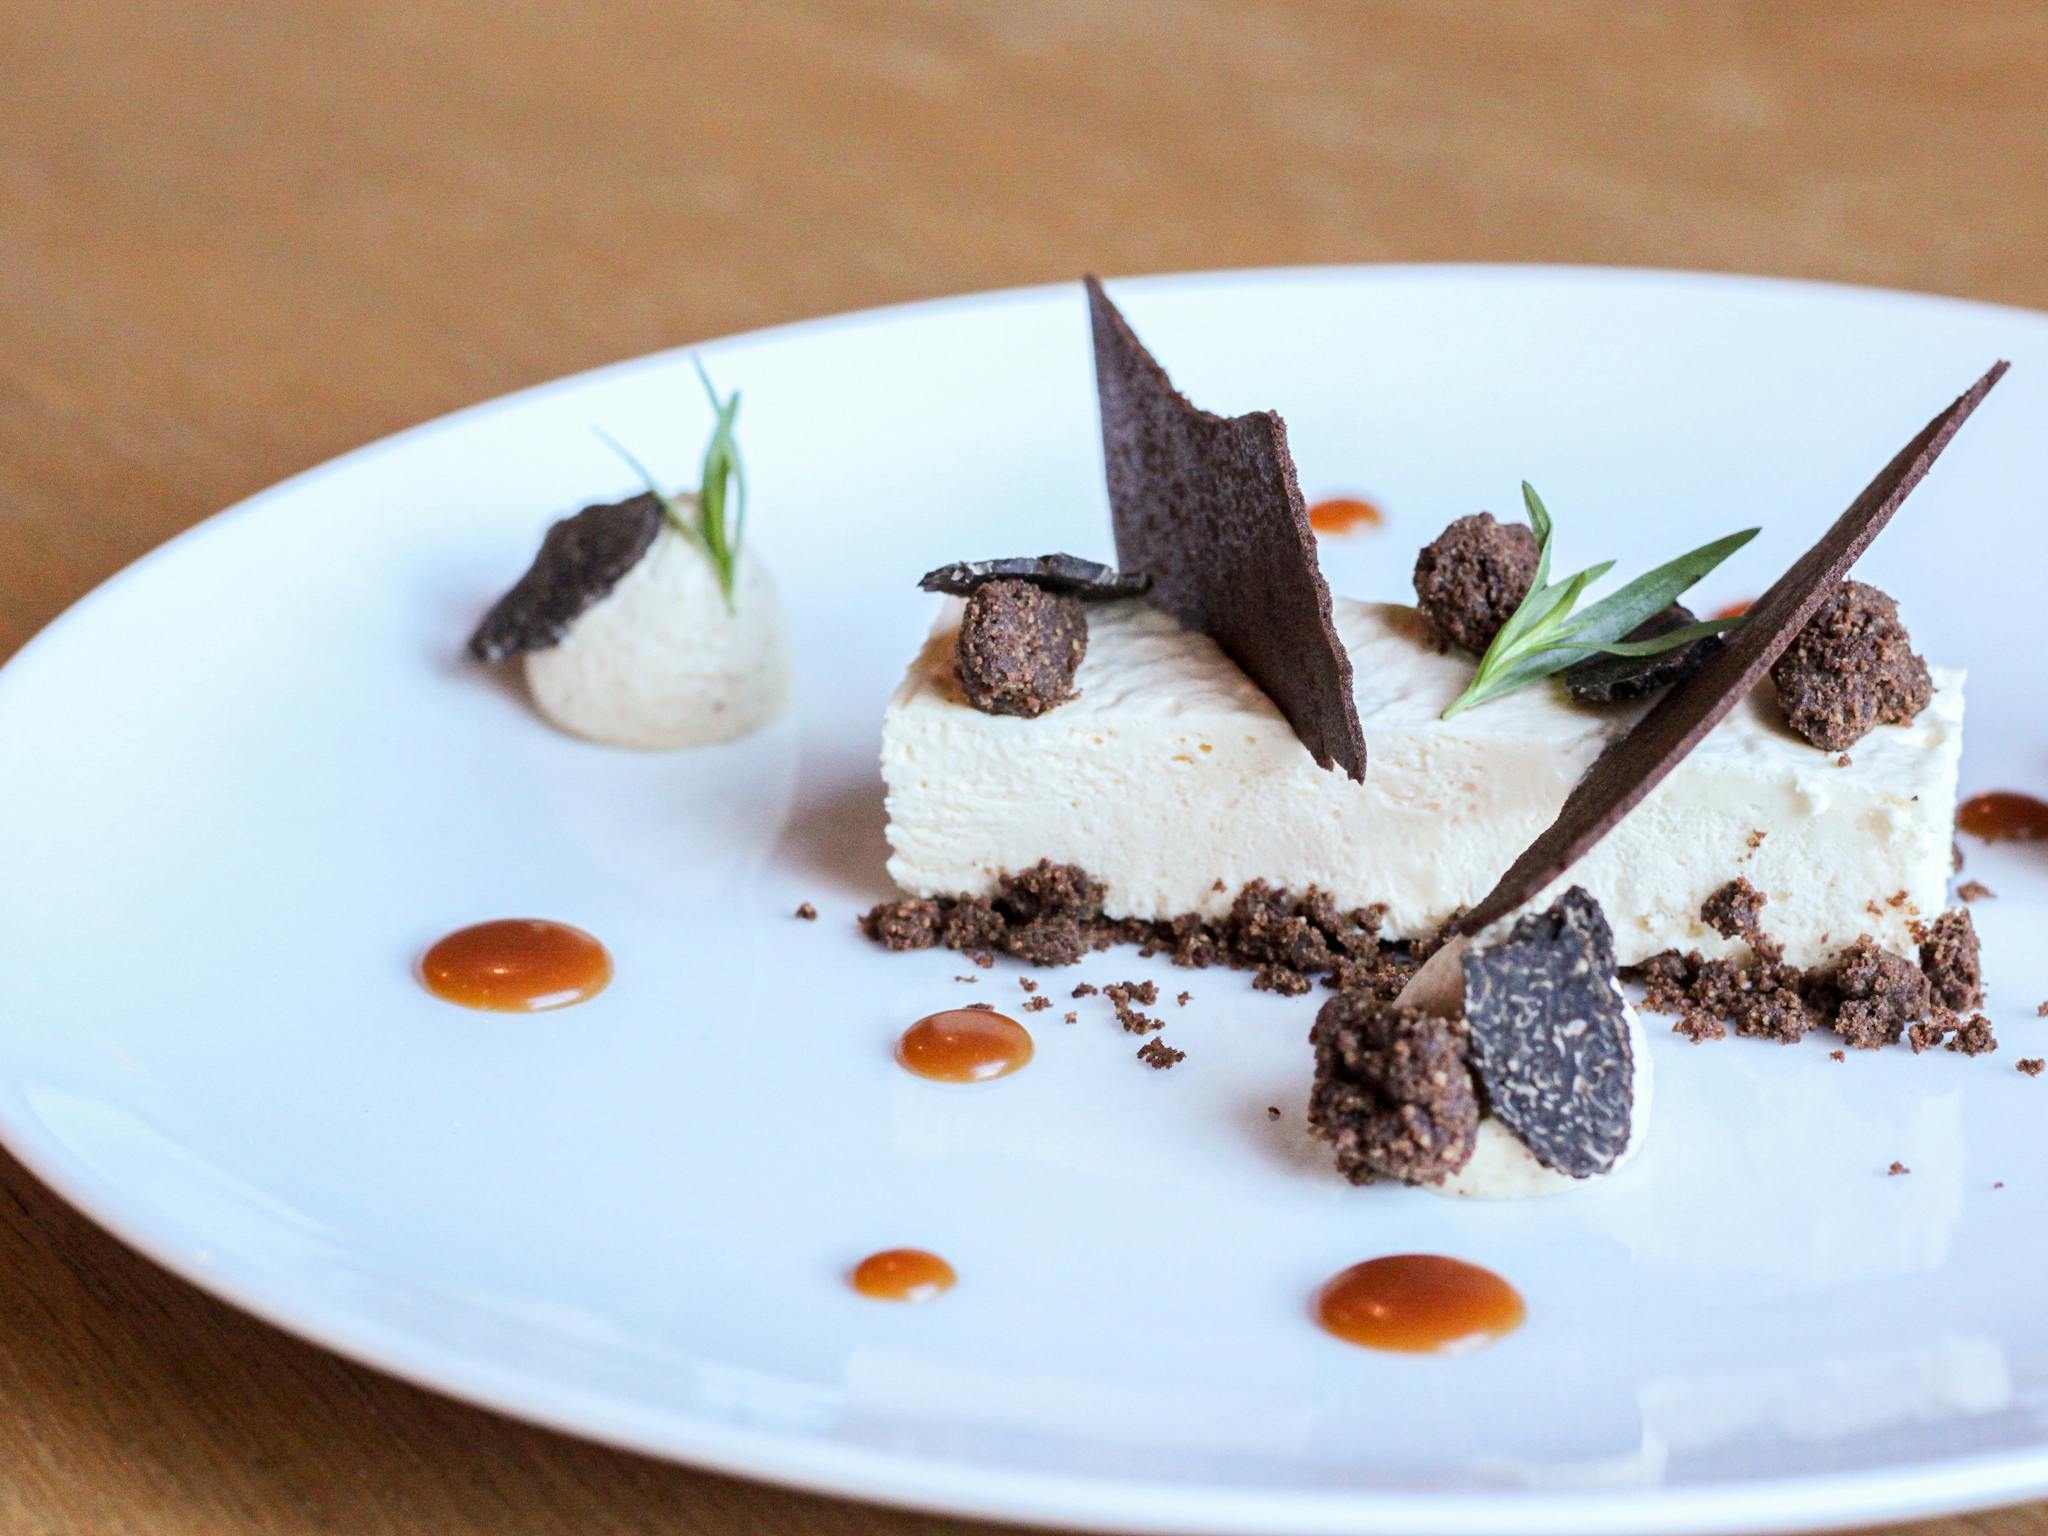 Truffle Dinner with a twist